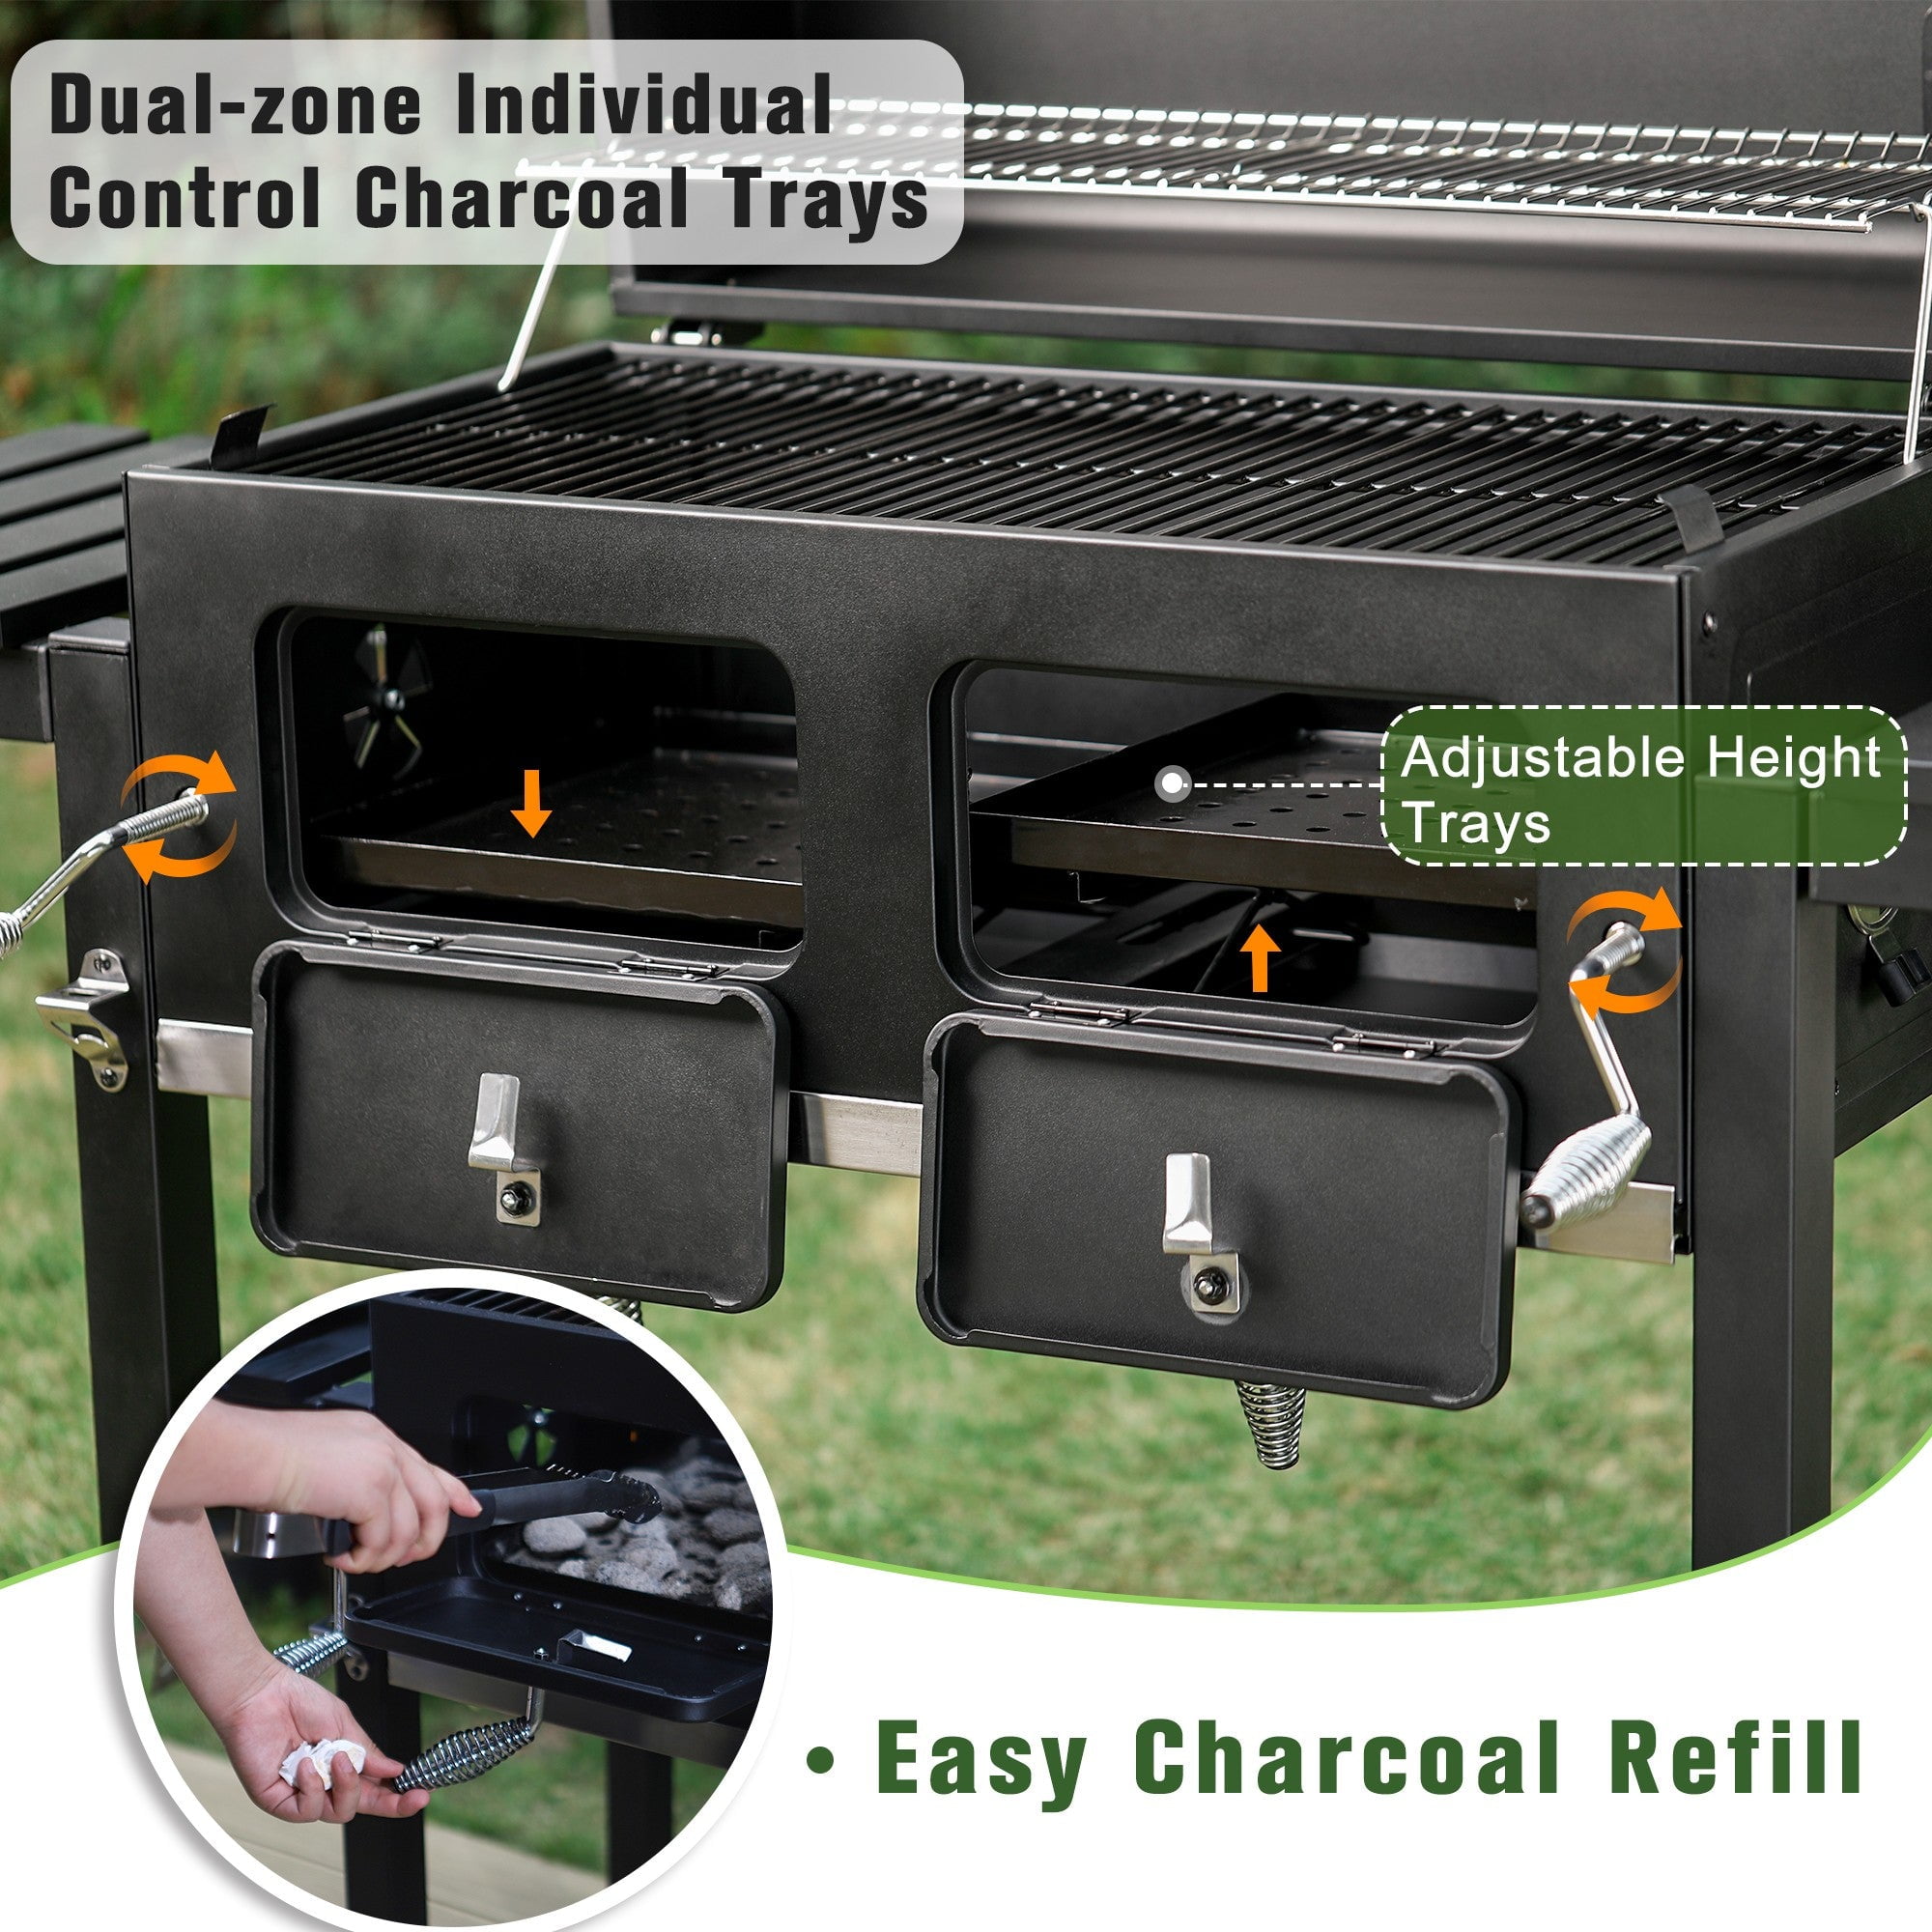 Sophia & William Extra Large Charcoal BBQ Grills with 794 SQ.IN. Cooking  Area, Outdoor Barbecue Grill with Dual-Zone Individual & Adjustable  Charcoal